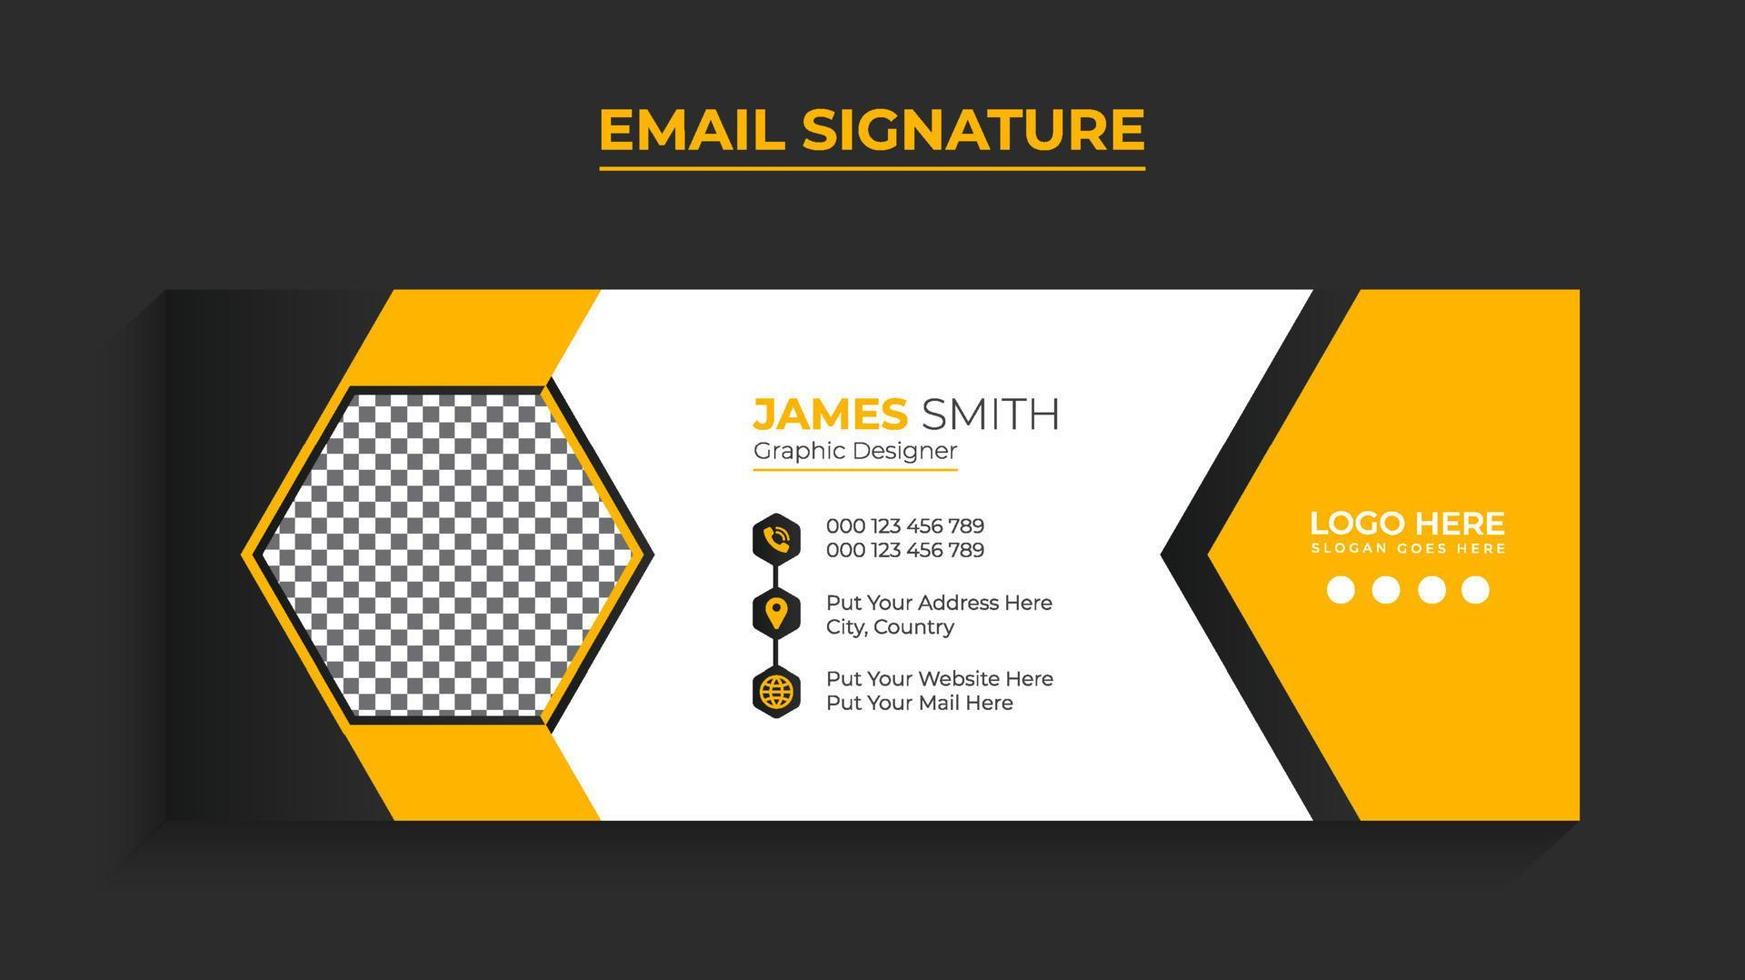 Professional modern Email signature or email footer Template design Pro Download vector